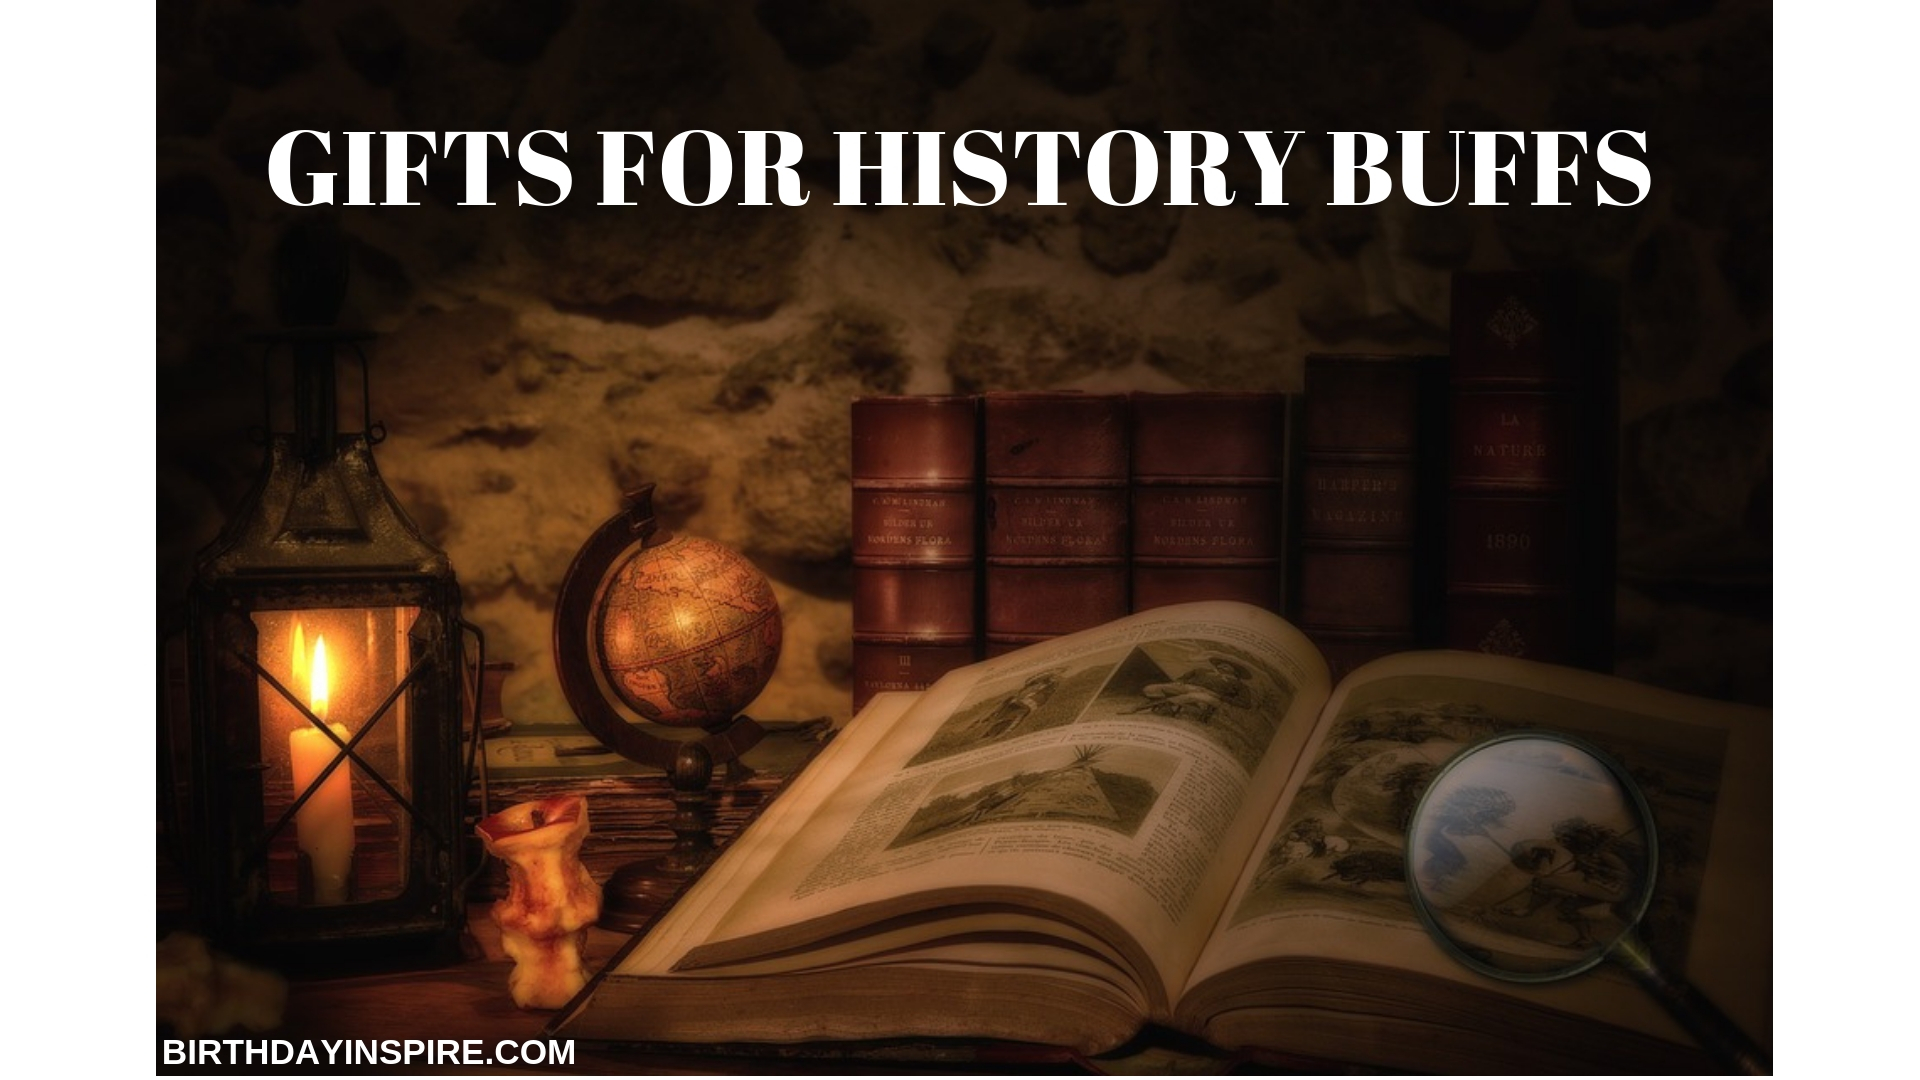 GIFTS FOR HISTORY BUFFS